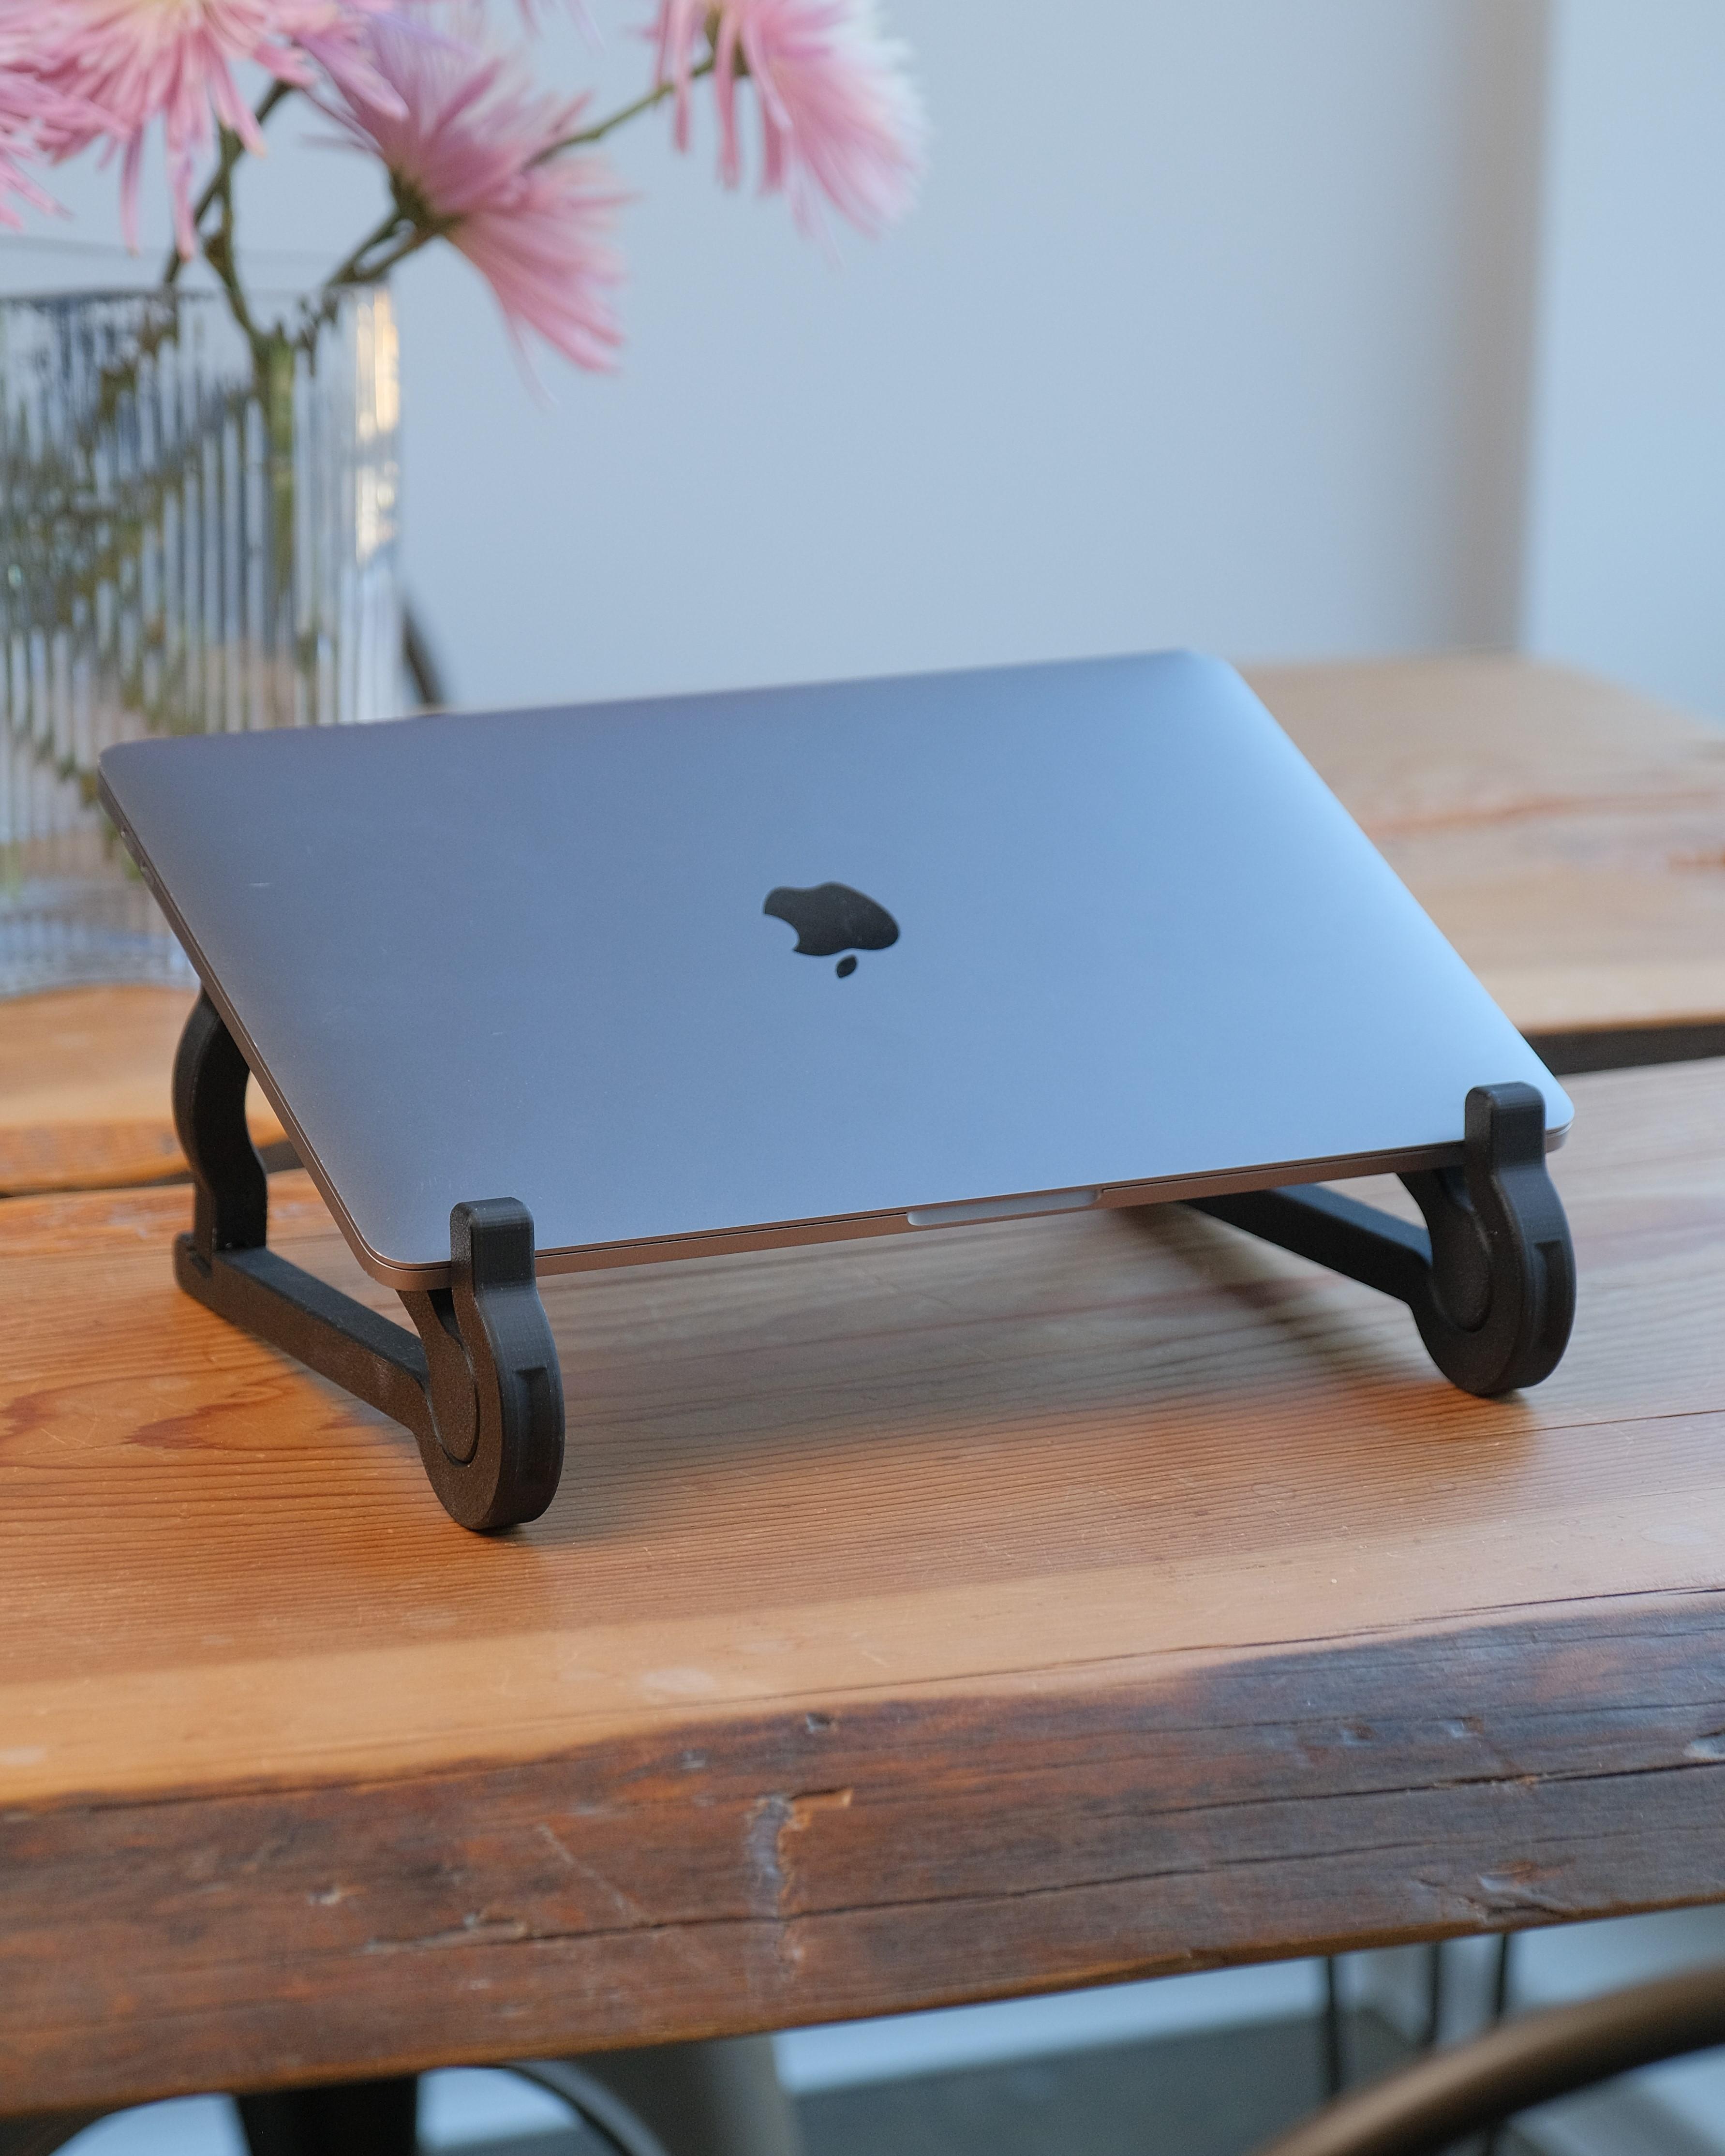 Laptop Stand - Collapsible 3d model